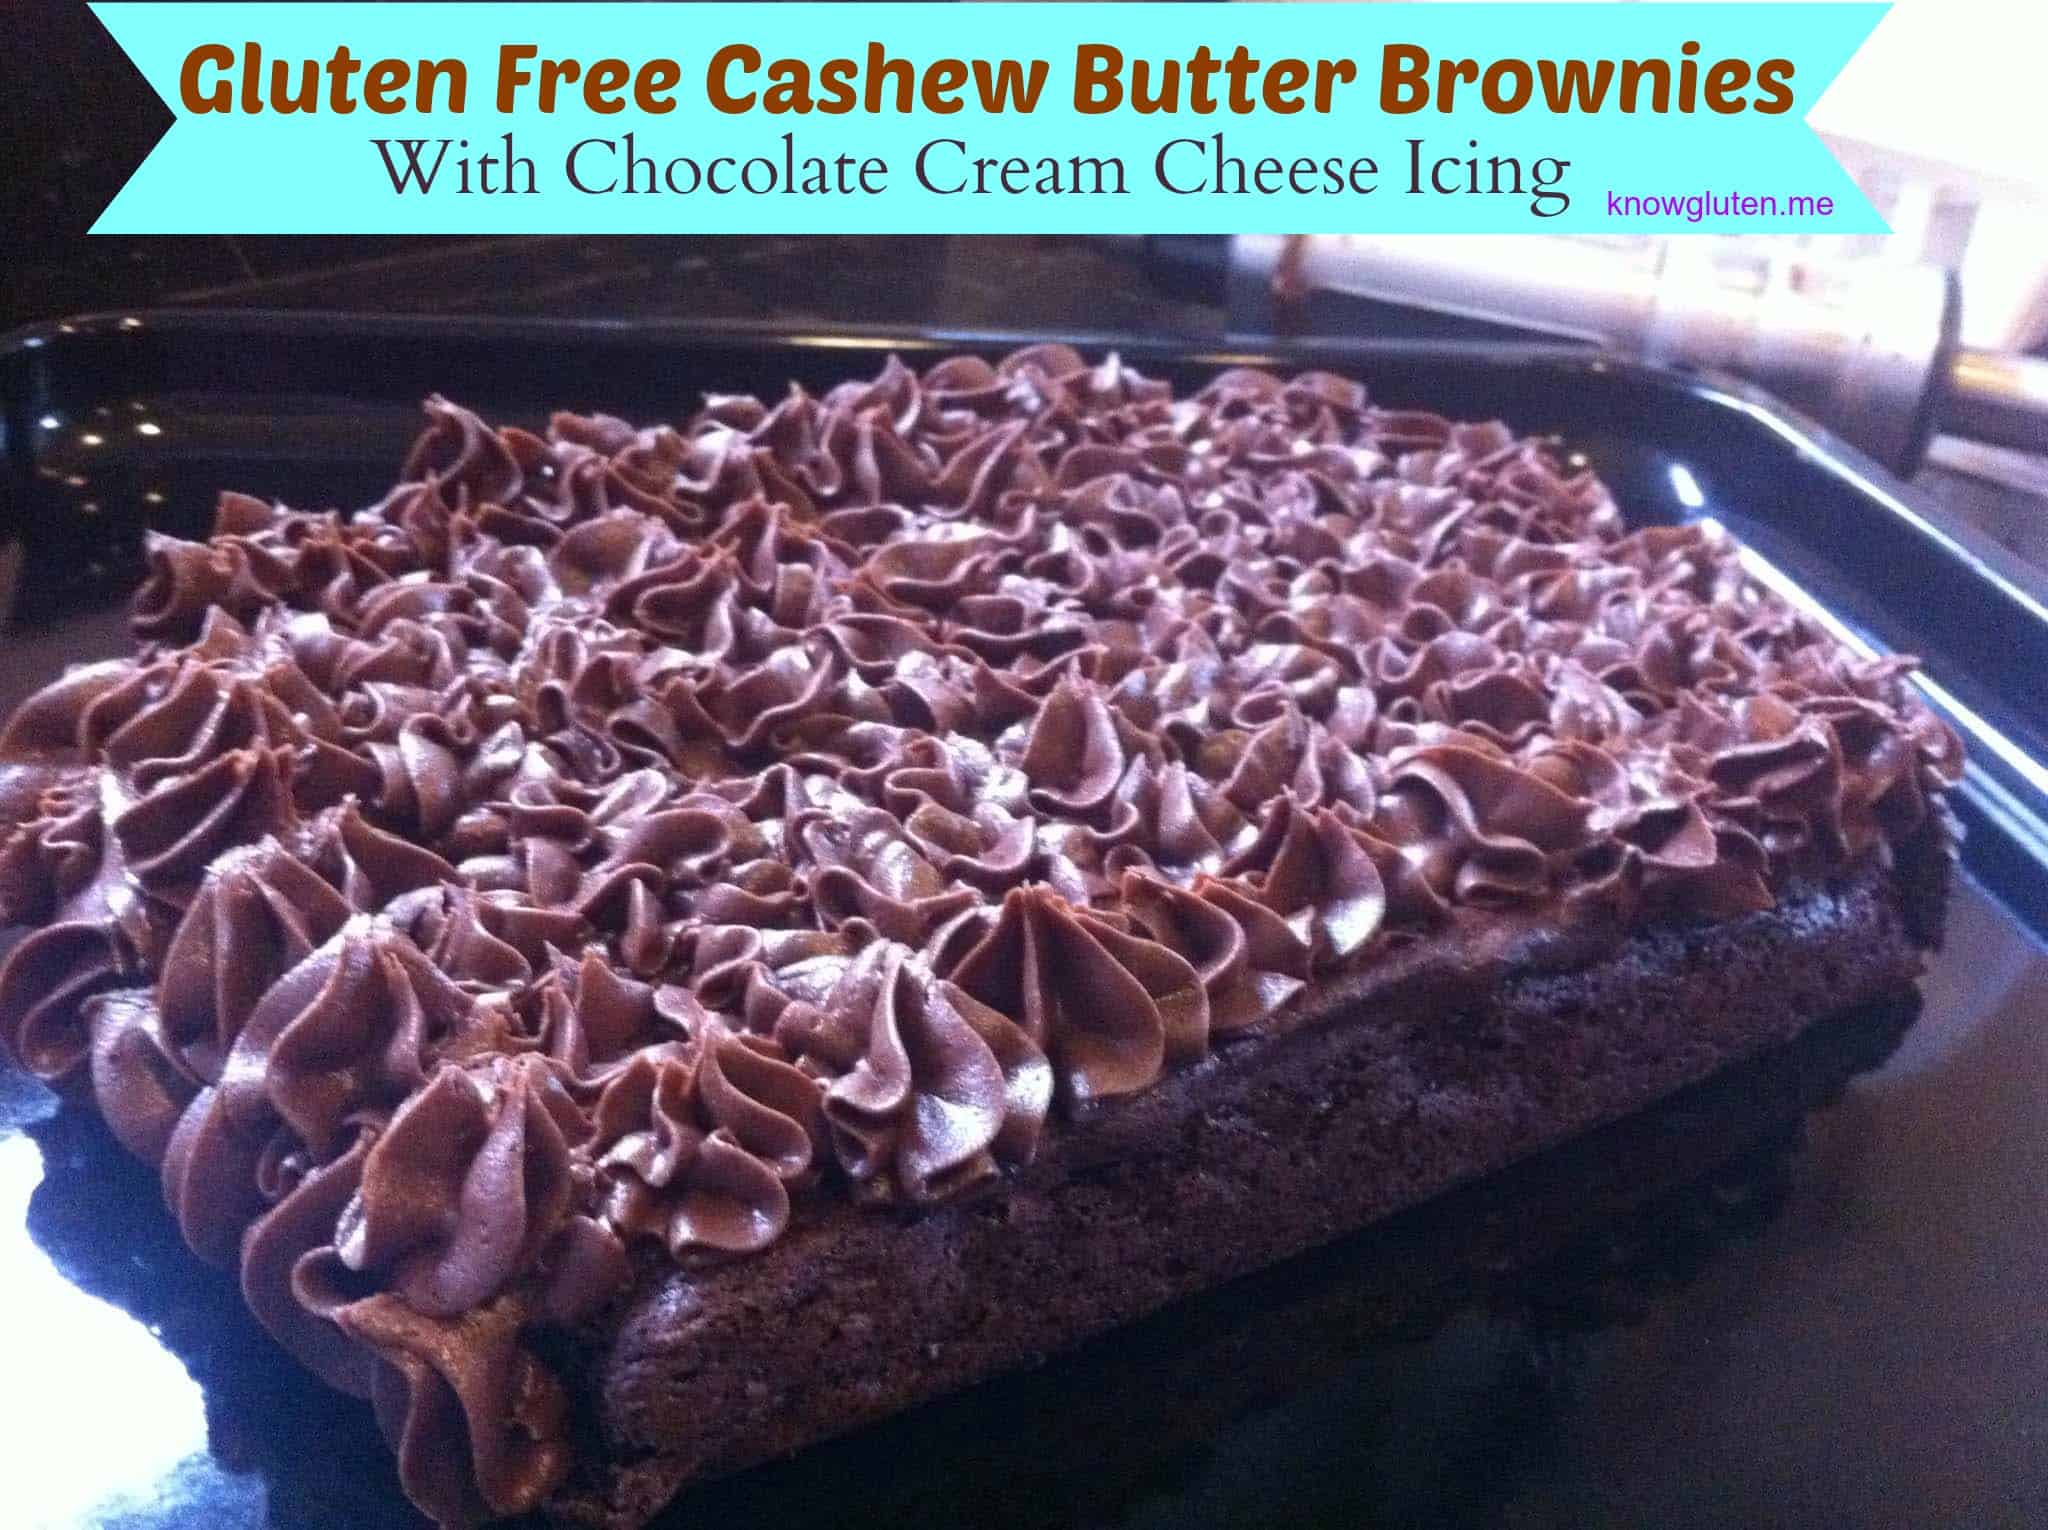 Gluten Free Cashew Butter Brownies with Chocolate Cream Cheese Icing from Knowgluten.me